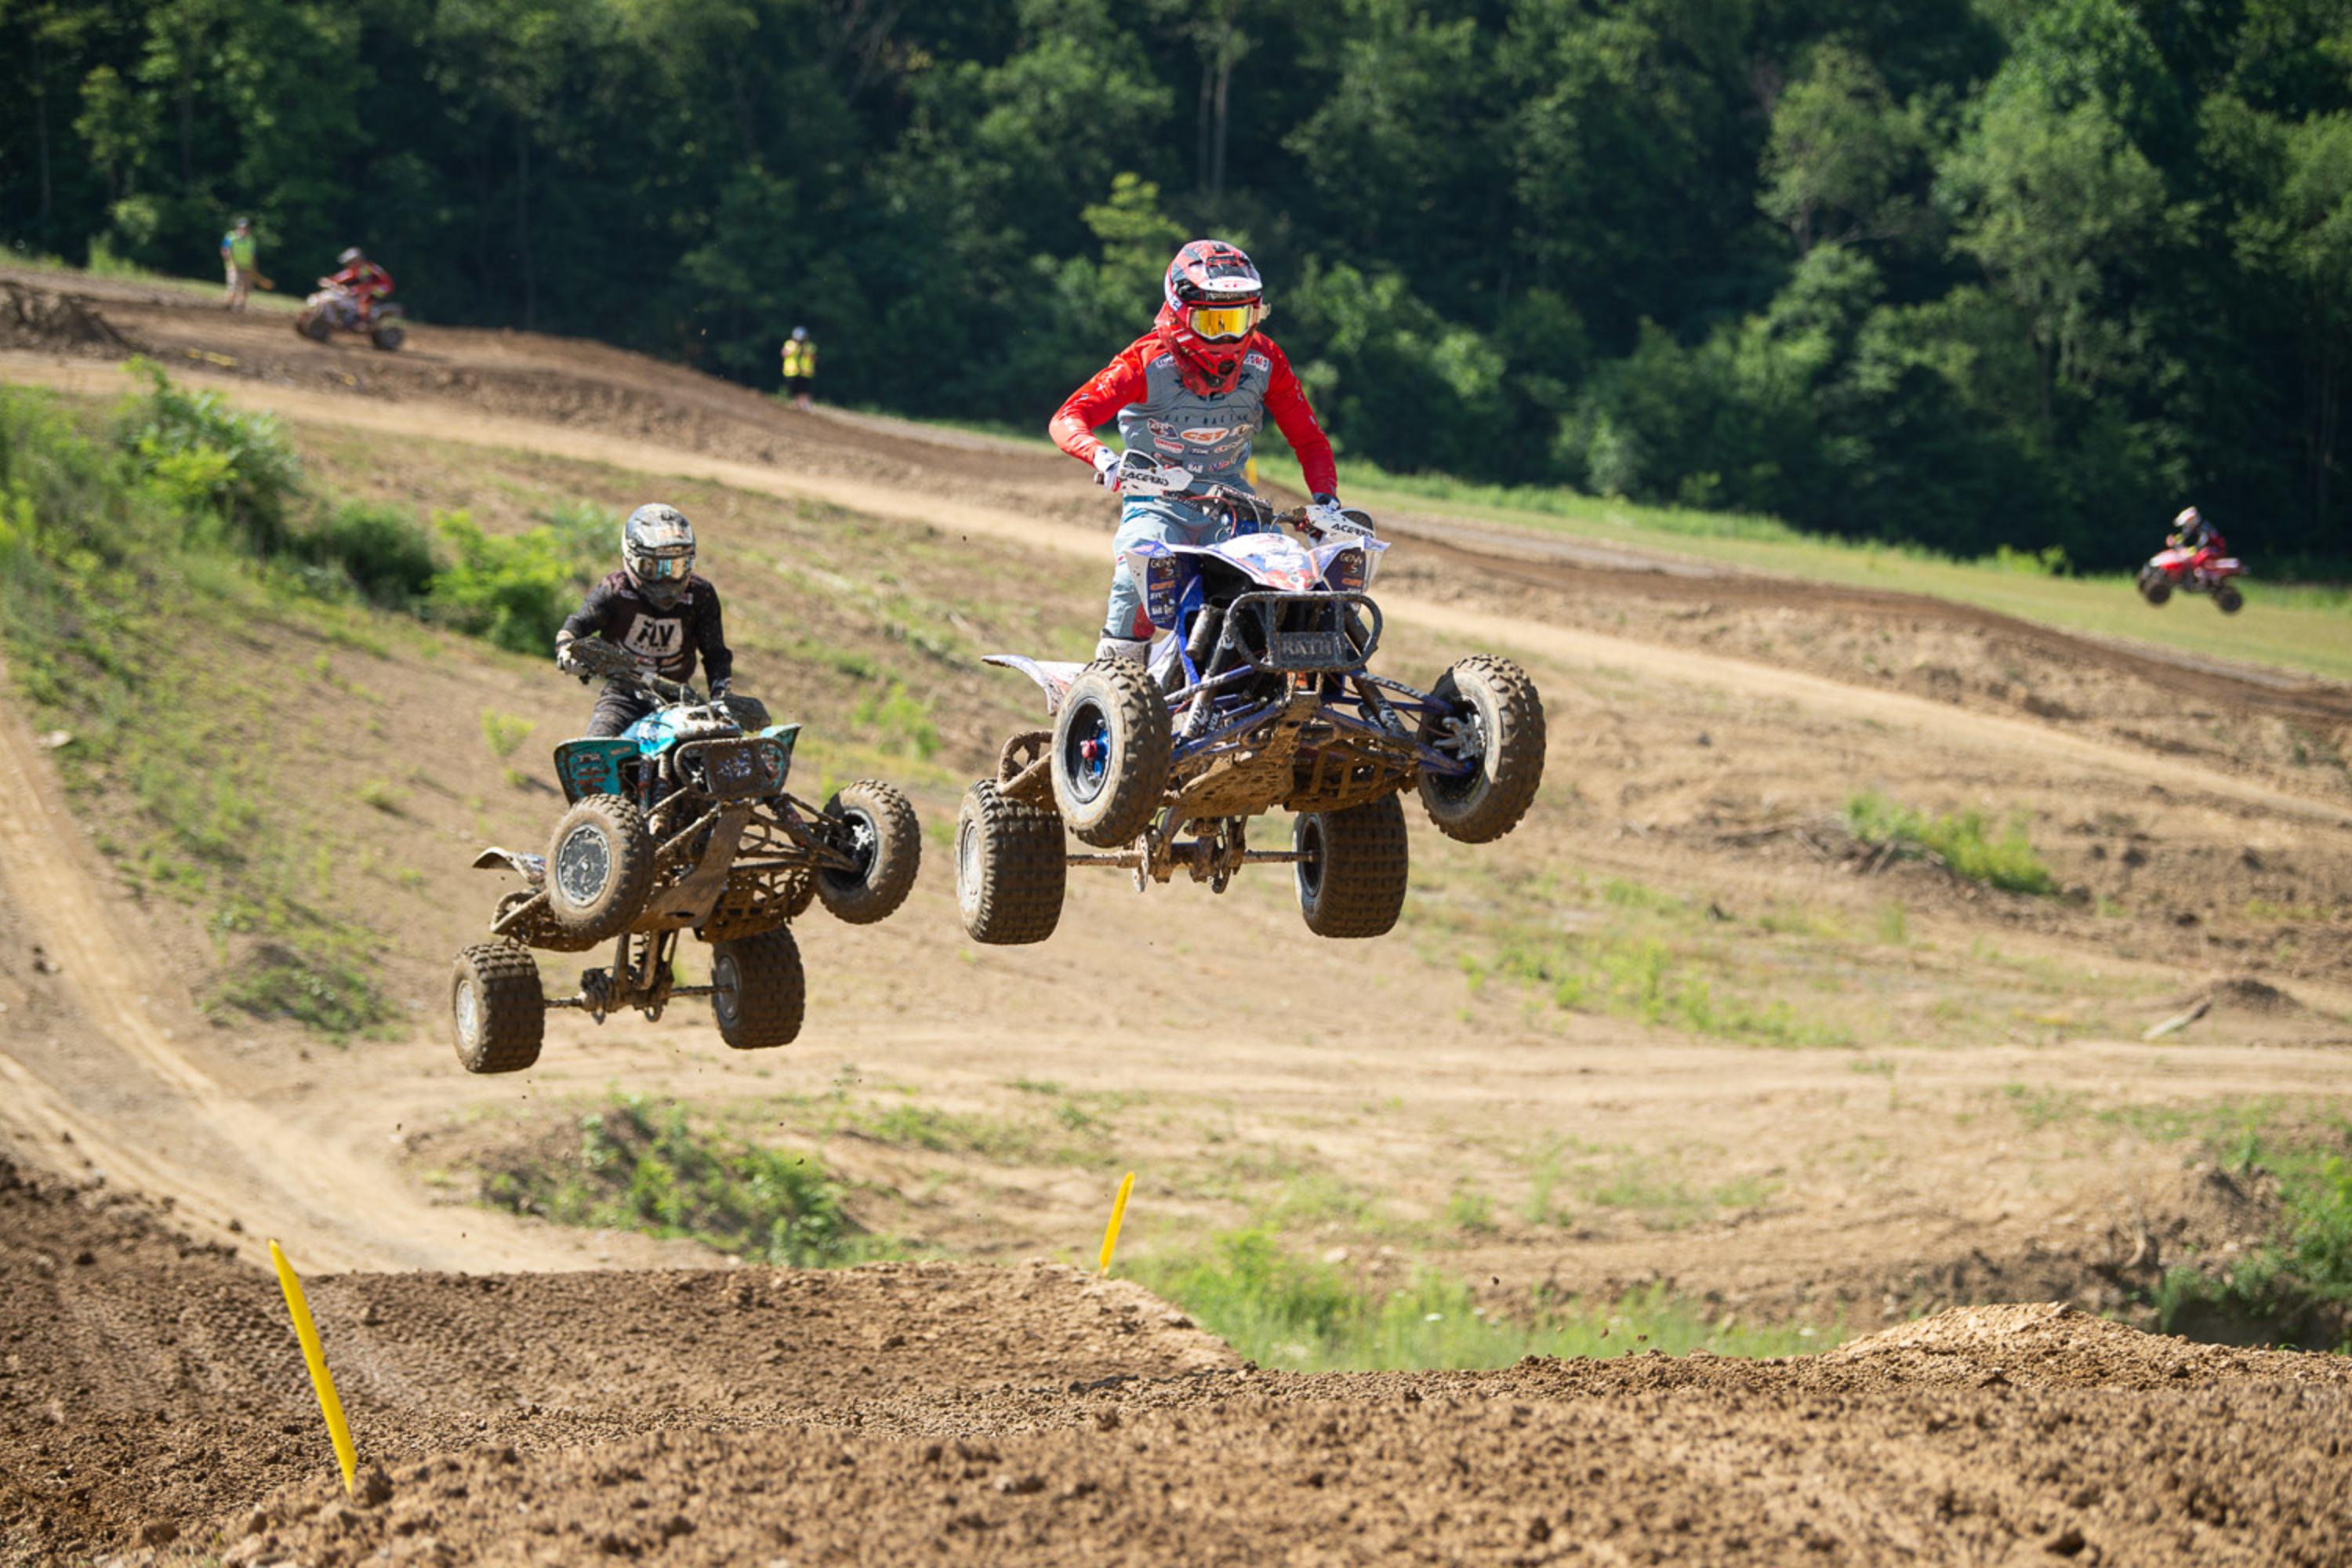 RLT Competition Bulletin 2020-15 Updates to Pro Motocross, GNCC and ATVMX Schedules